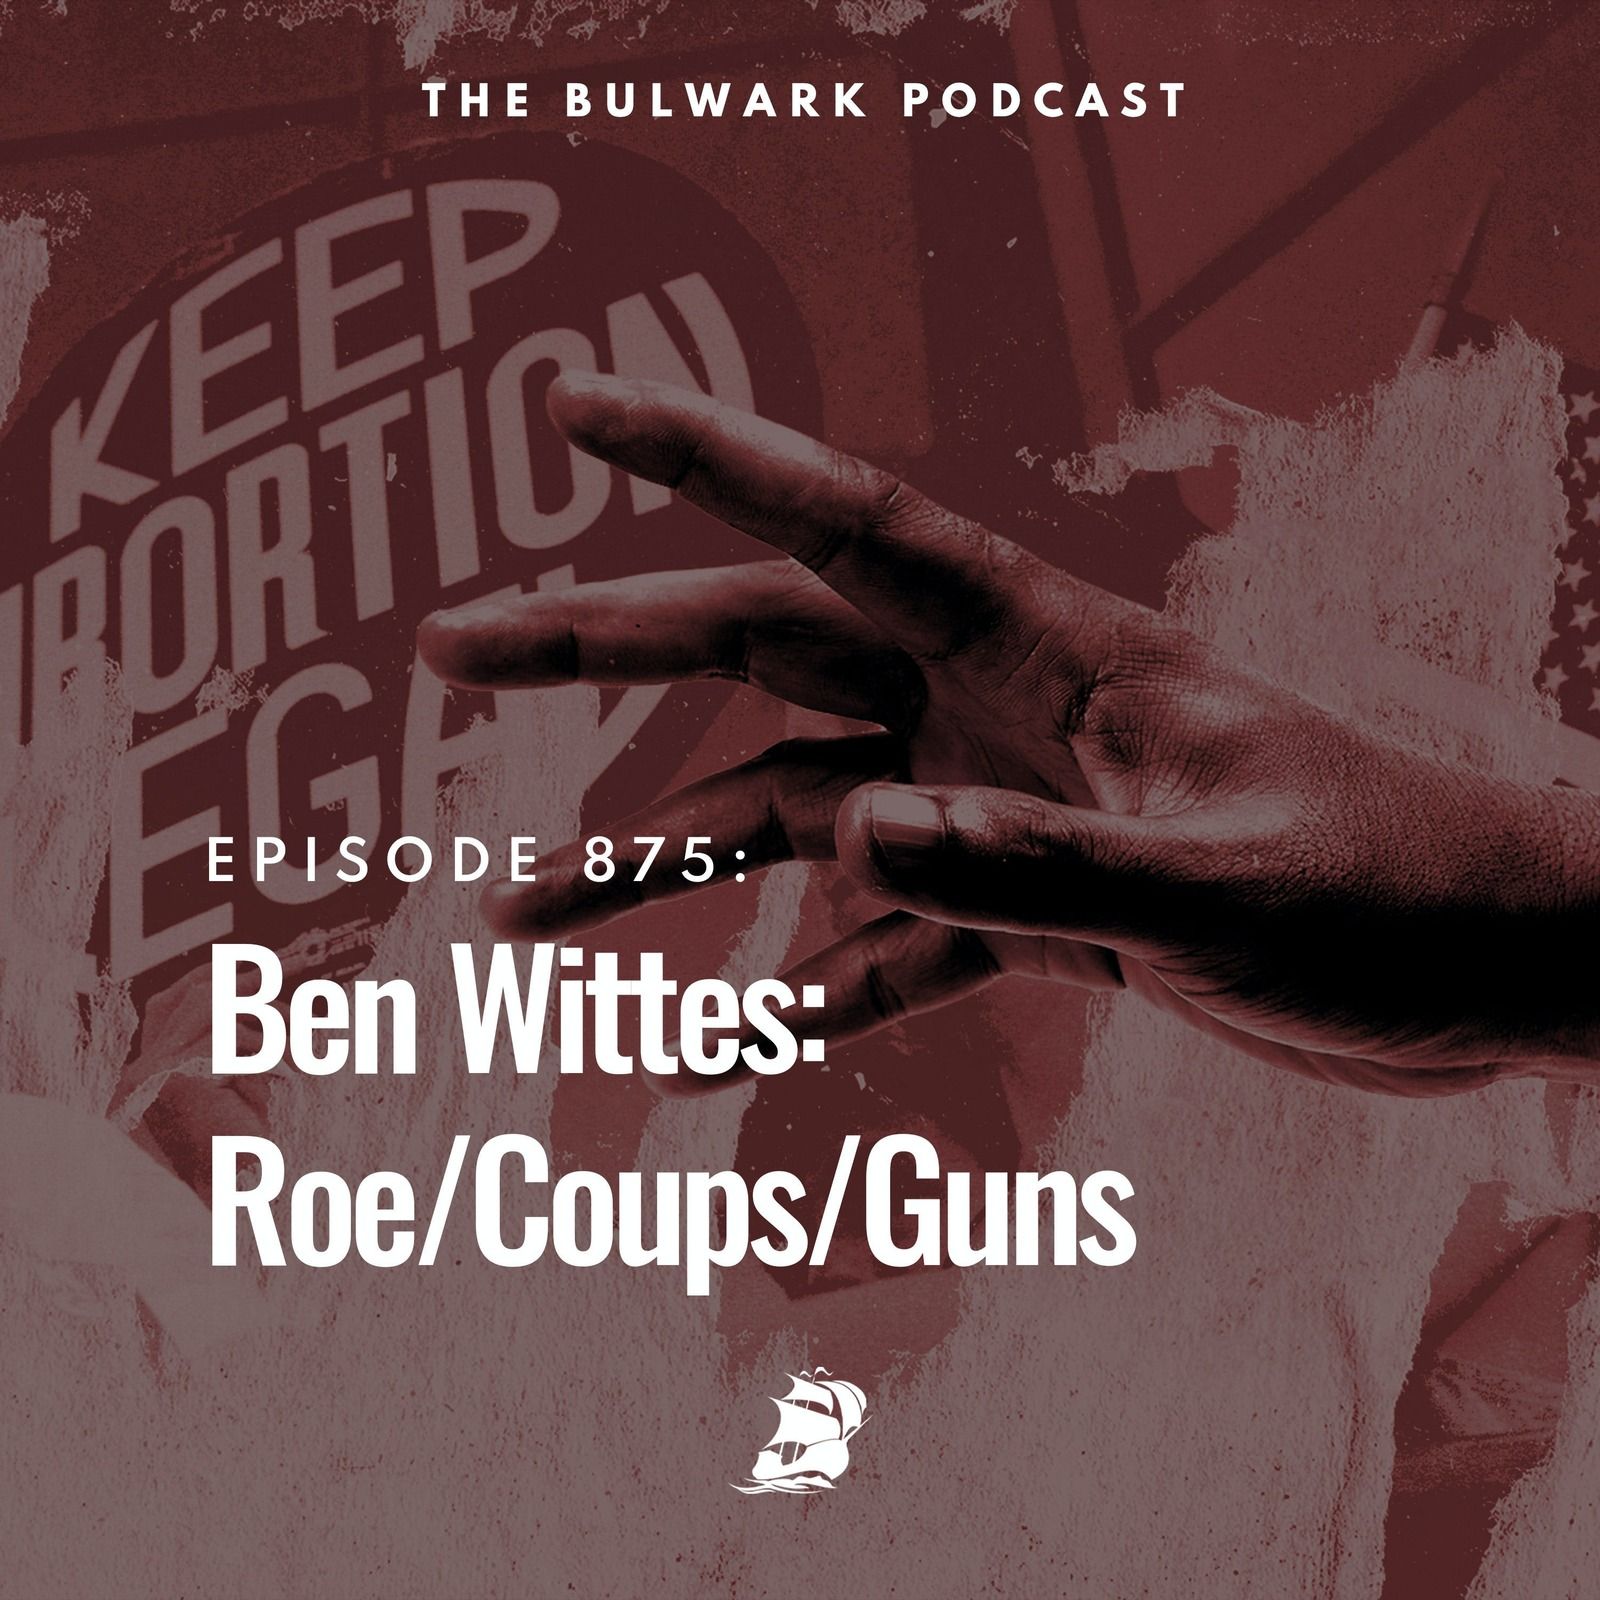 Ben Wittes: Roe/Coups/Guns by The Bulwark Podcast